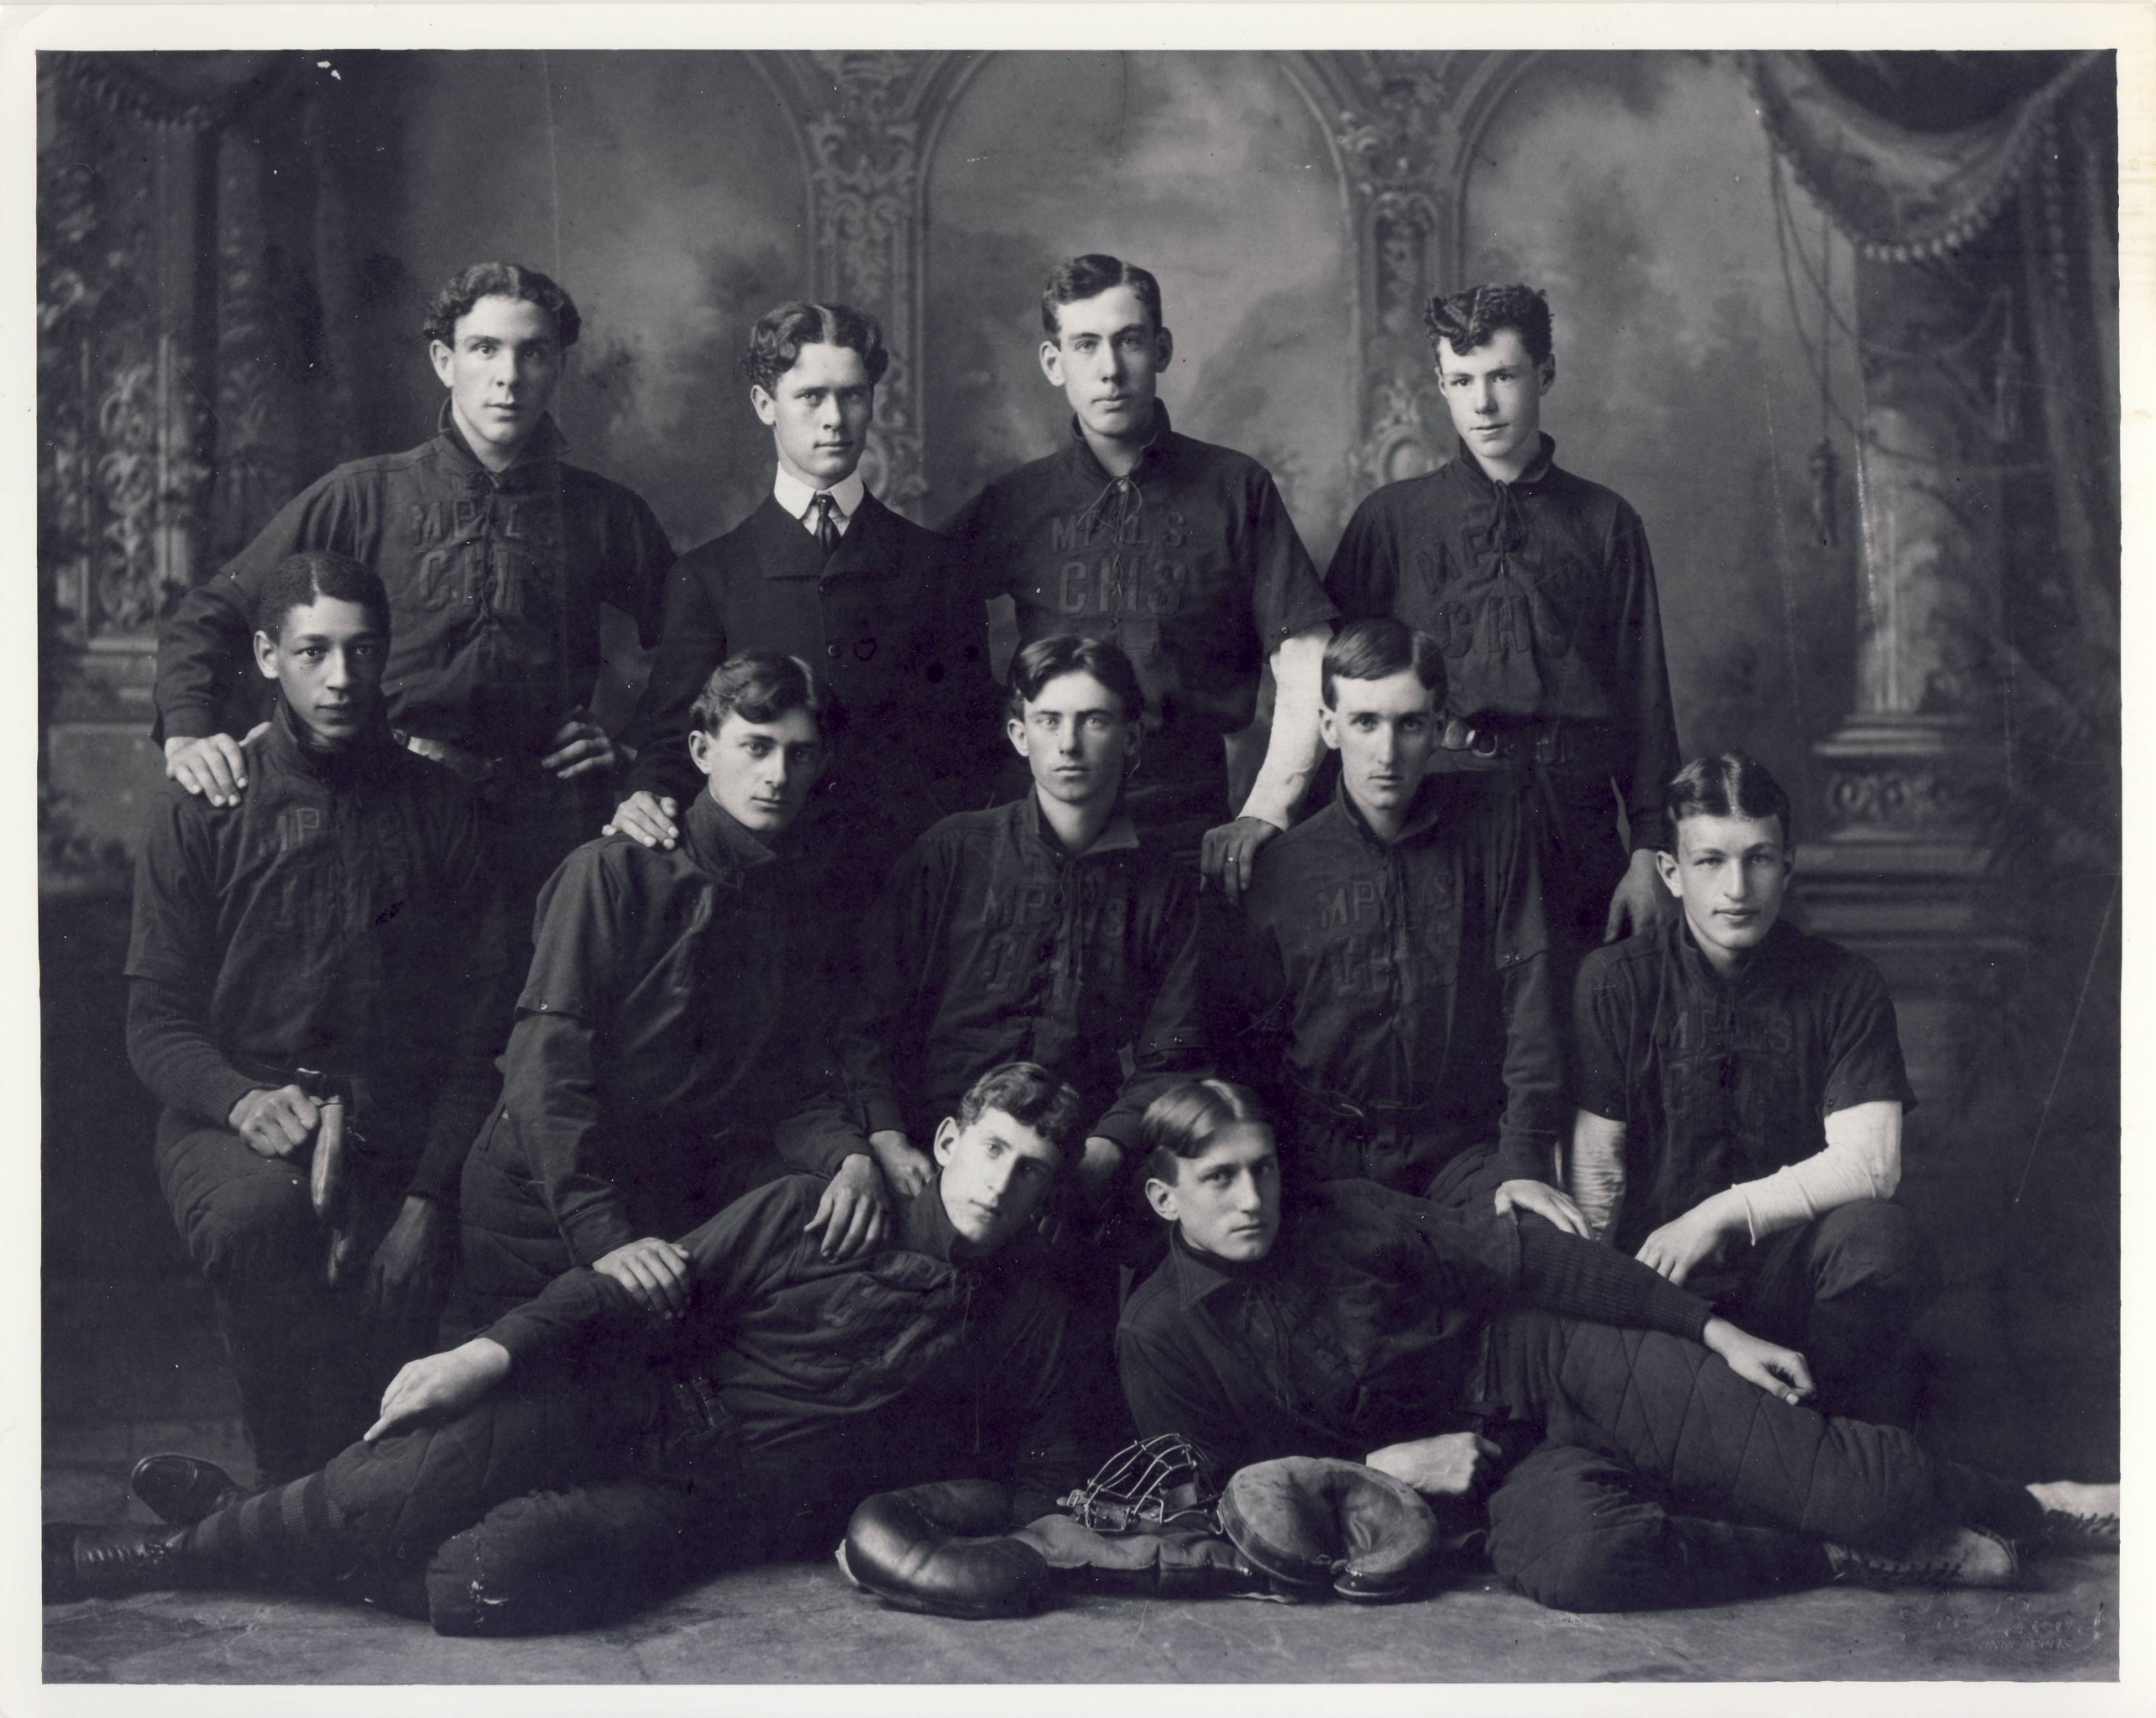 Marshall (second row, left) integrated the 1900 Minneapolis Central High School baseball team, above and broke the color line at the University of Minnesota.